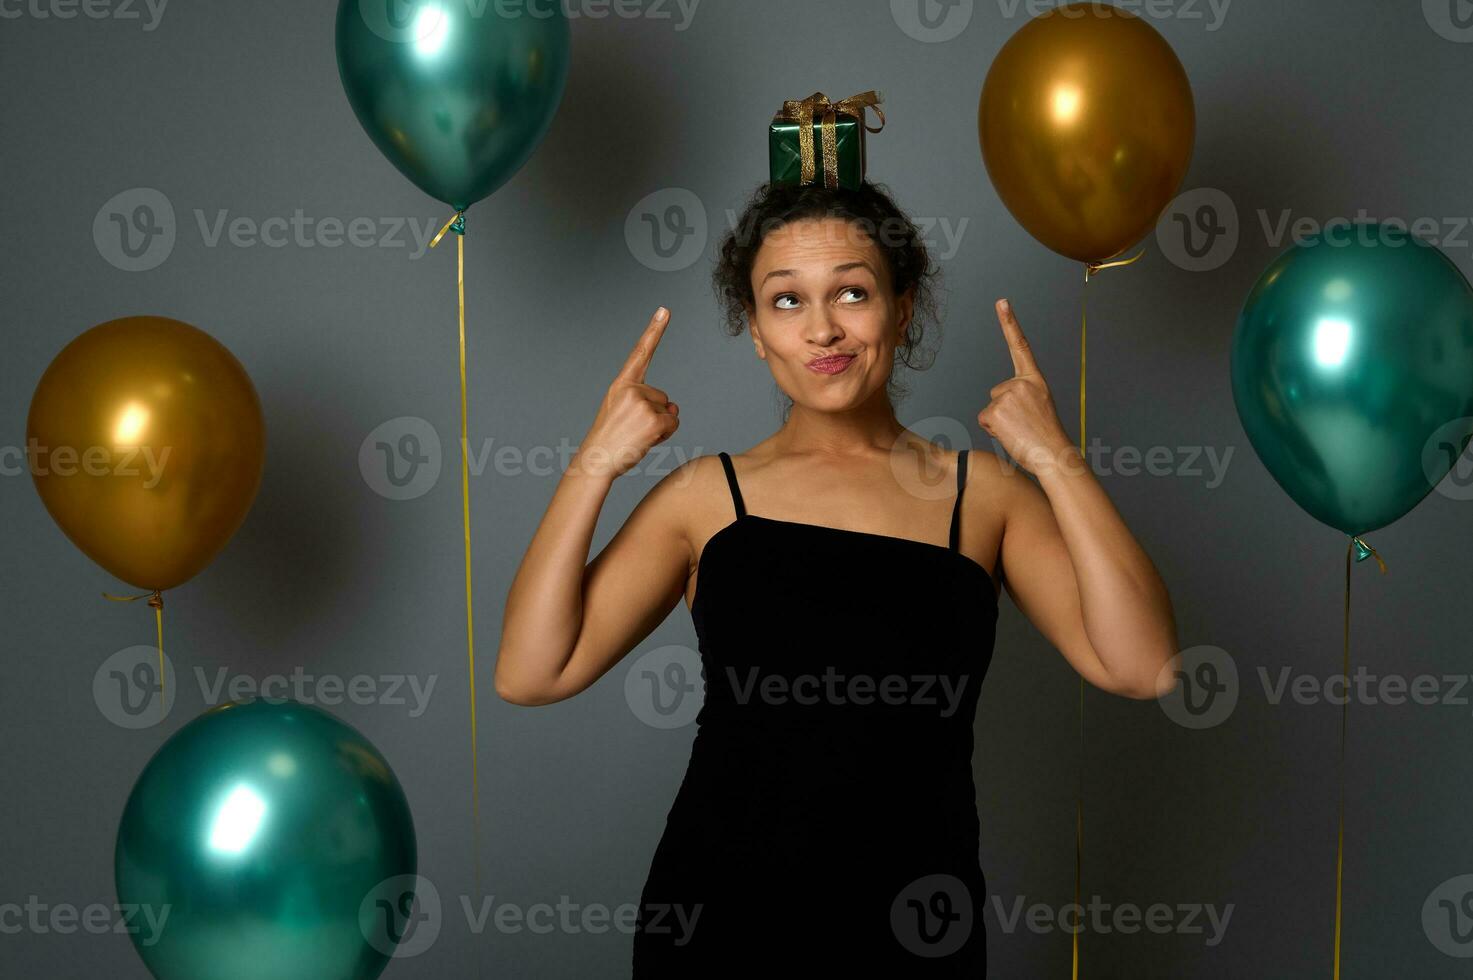 African pretty woman in evening dress points fingers on a Christmas gift on her head, looks up, poses against gray wall background decoration with golden green metallic air balls. Celebration concept photo